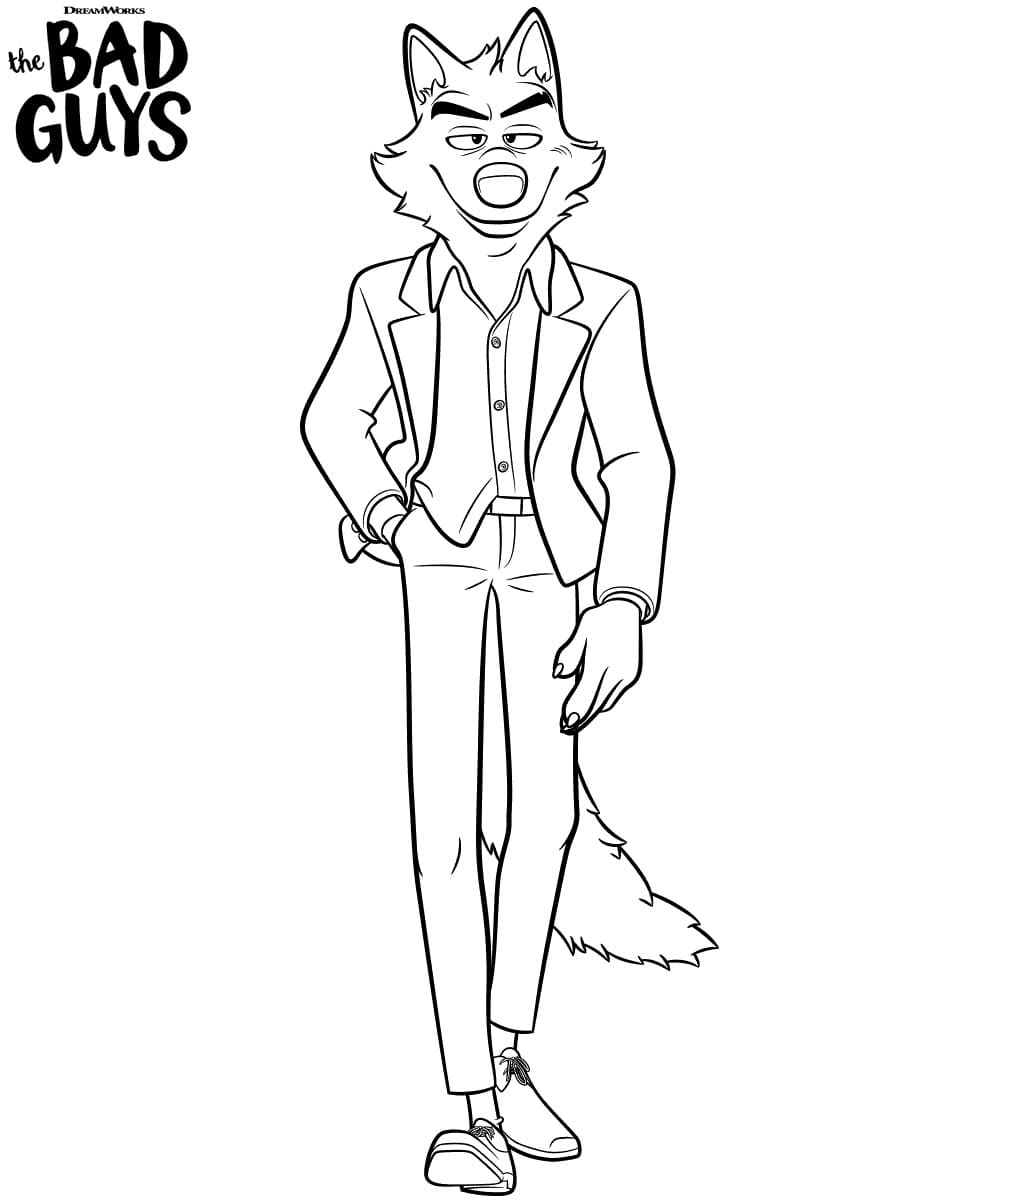 The Bad Guy Coloring Pages Pdf to Print - Mr. Wolf from The Bad Guys coloring page